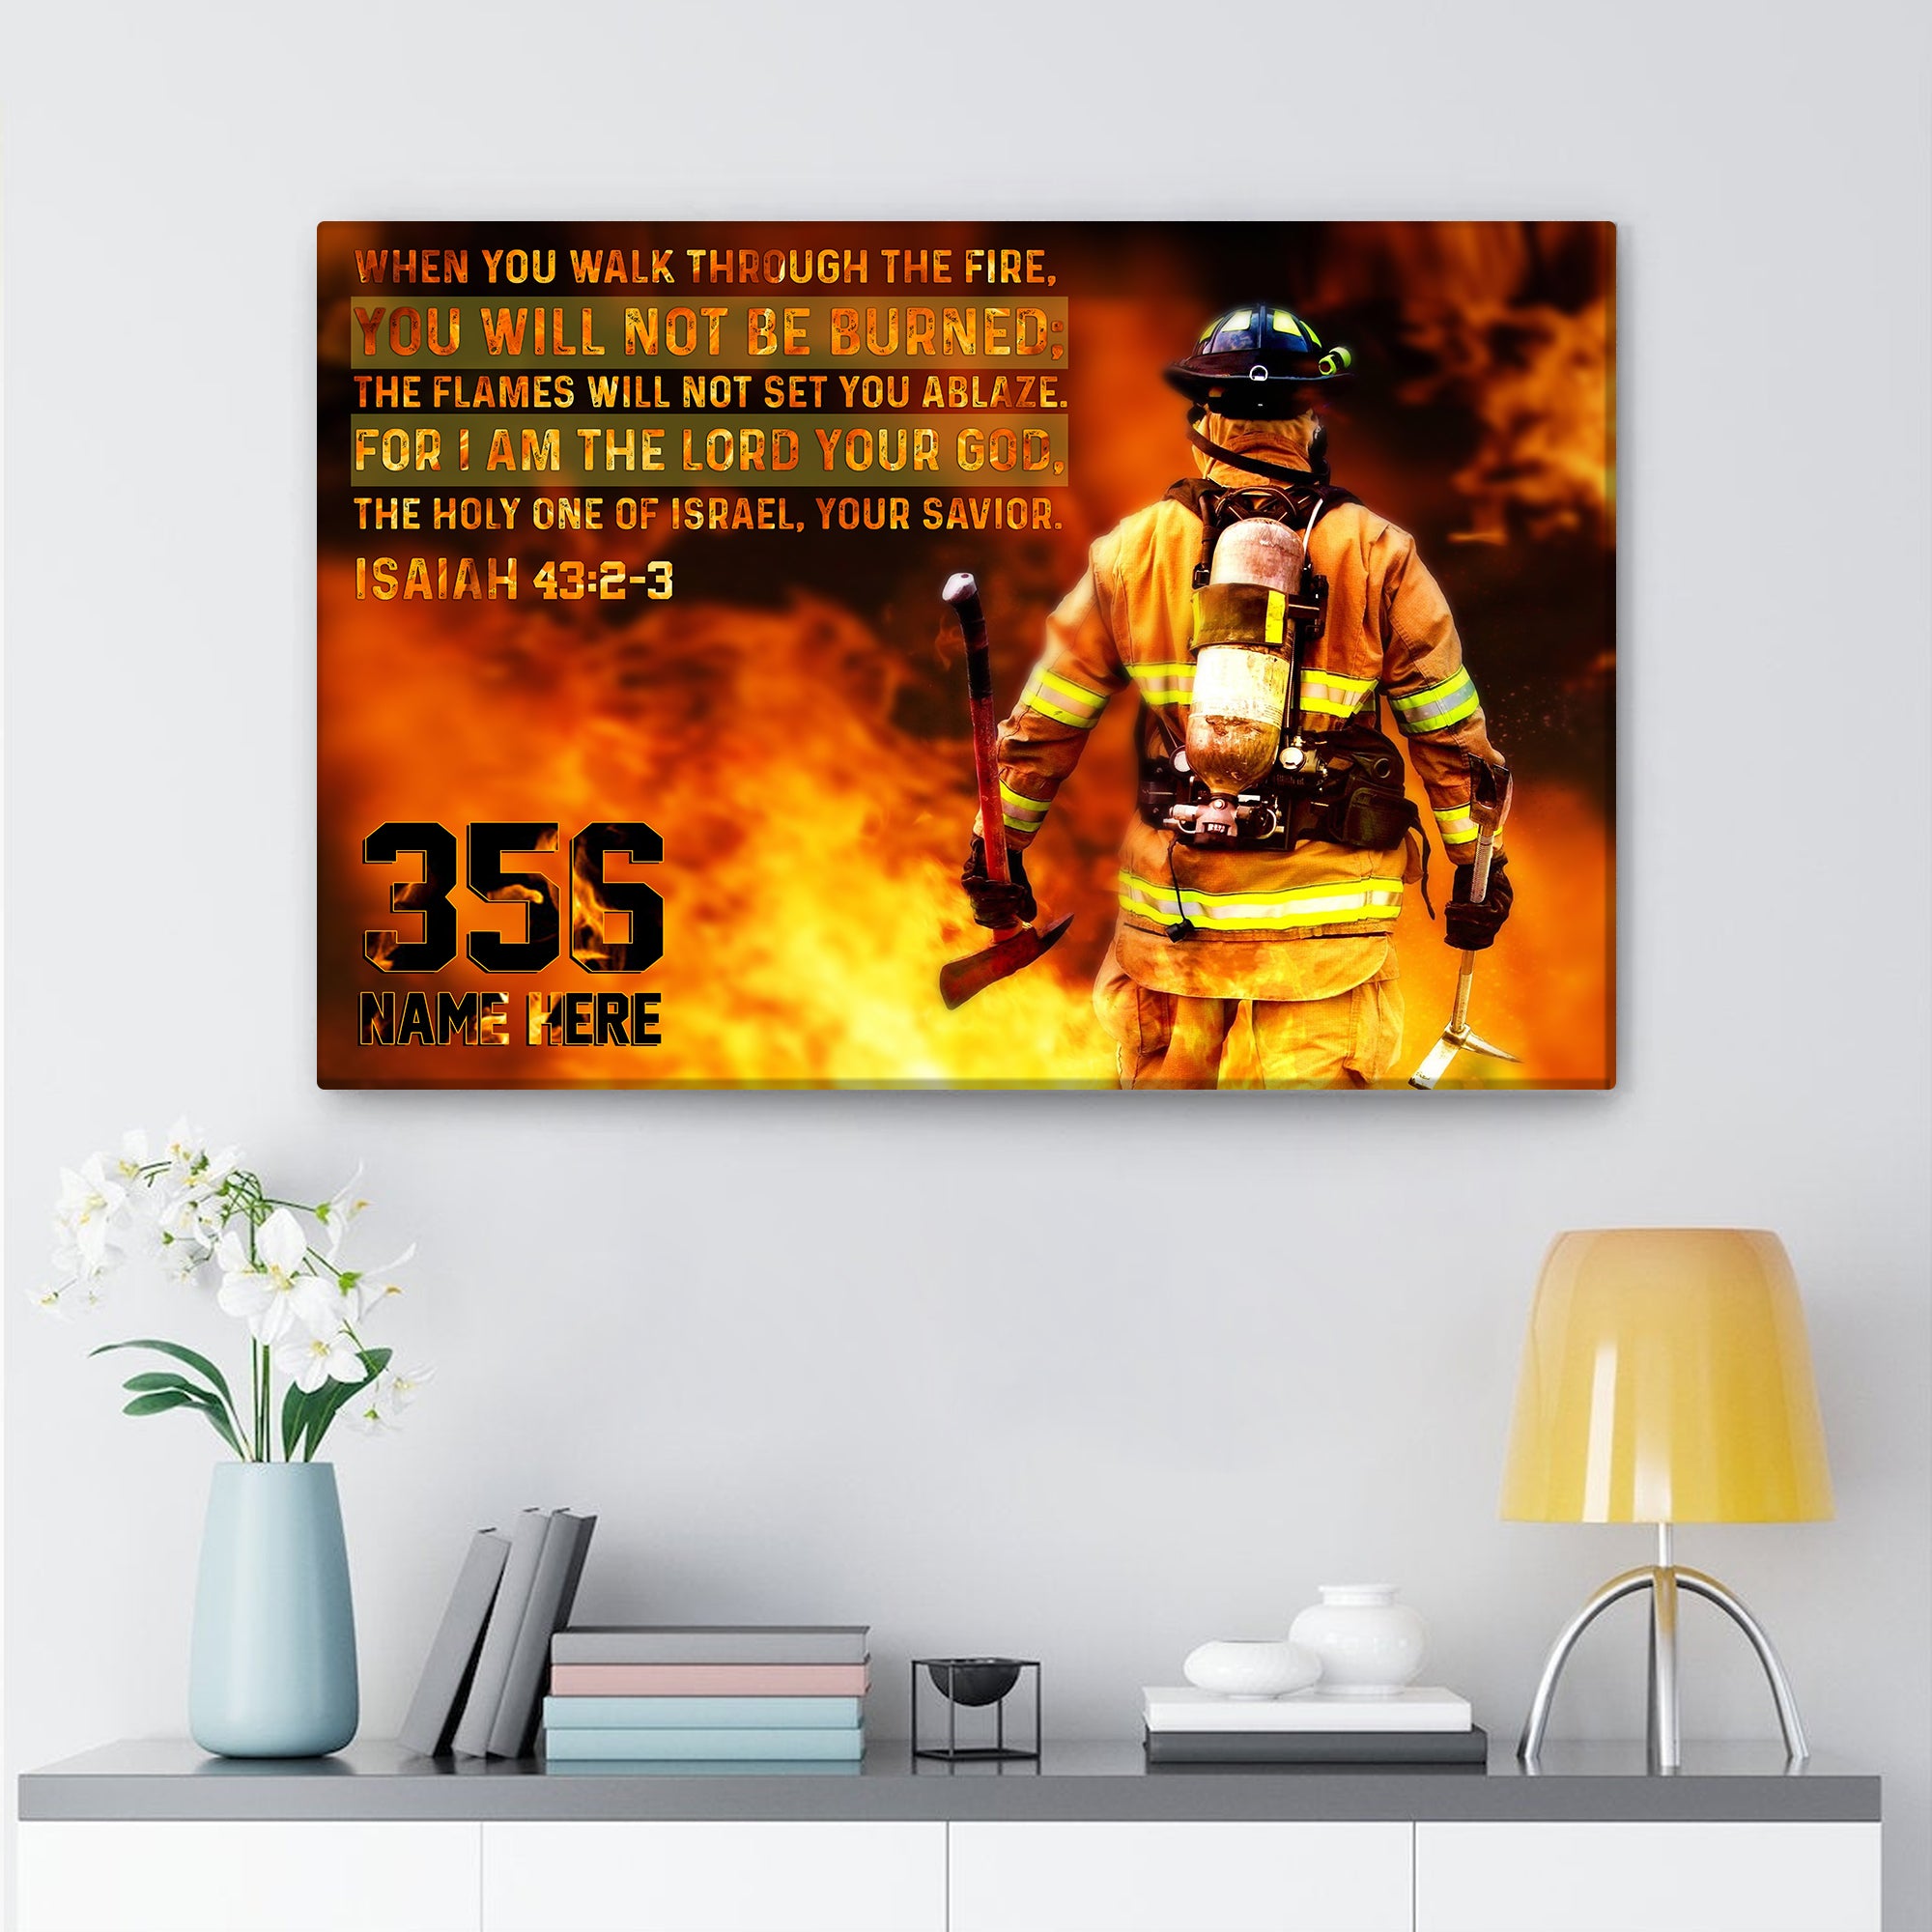 Personalized Firefighter Poster